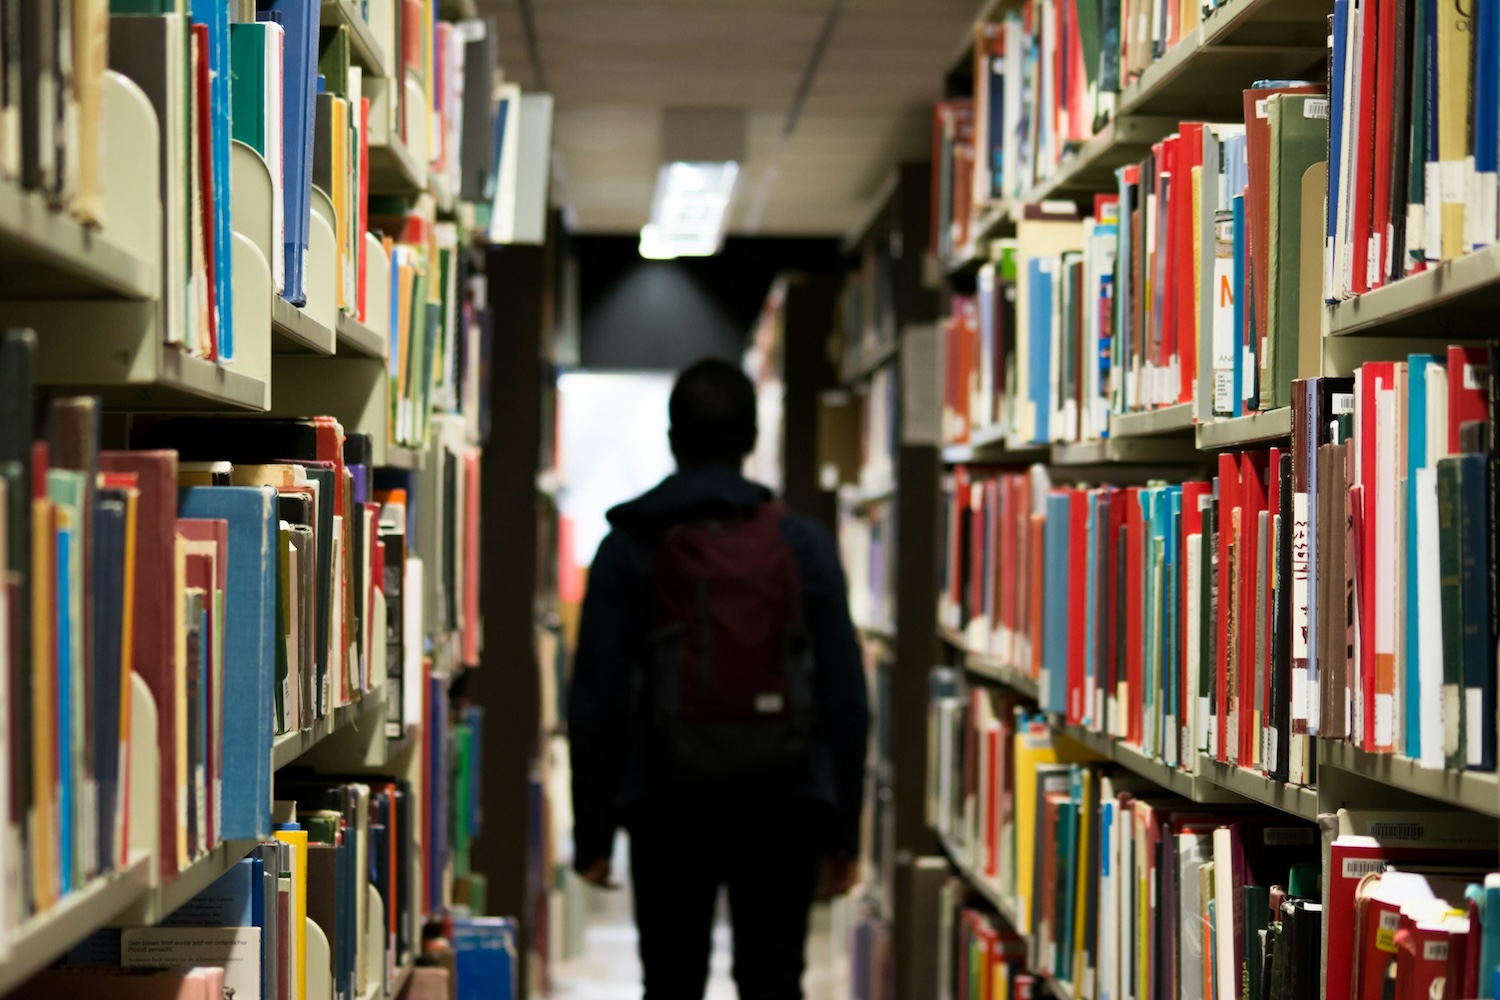 #Furthering Your Education: Top Resources for Going Back to Grad School After Working